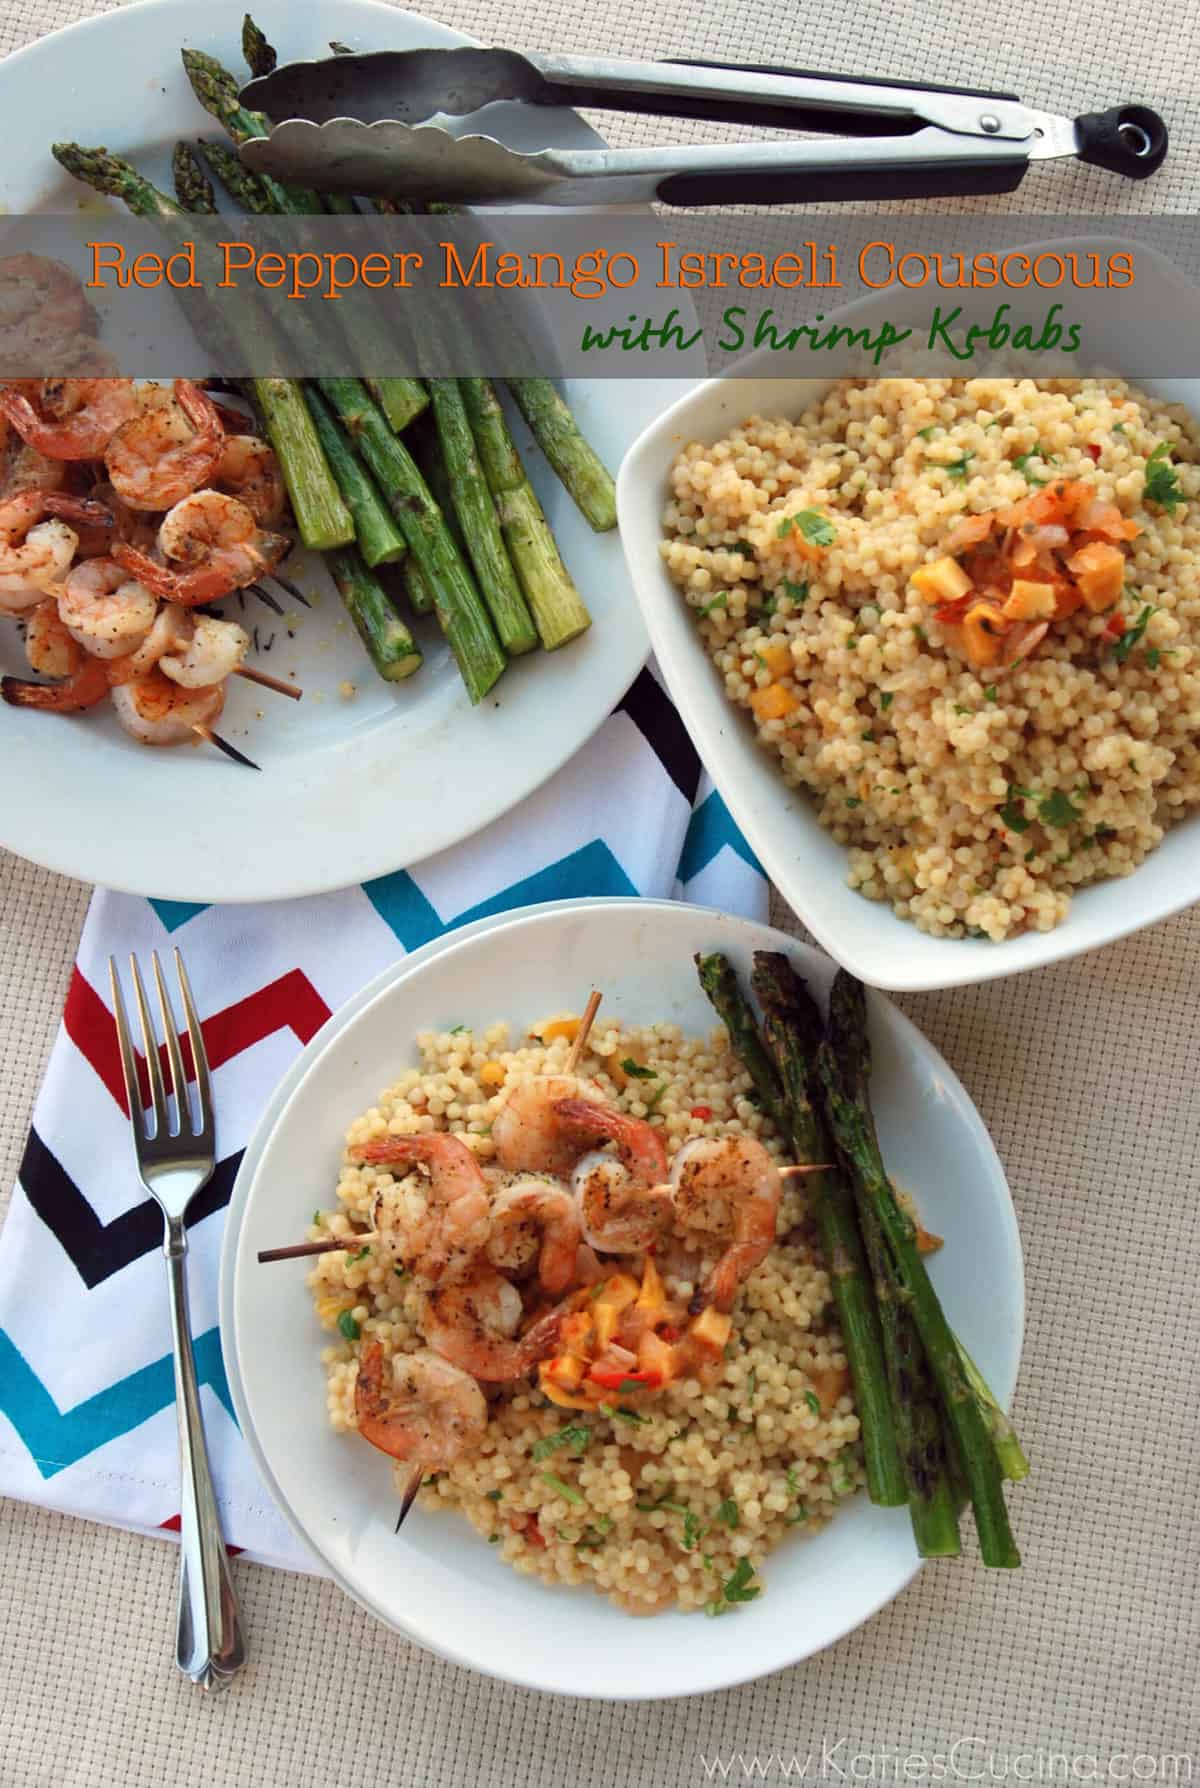 Top view of two plates with shrimp skewers sitting on top of israeli couscous.